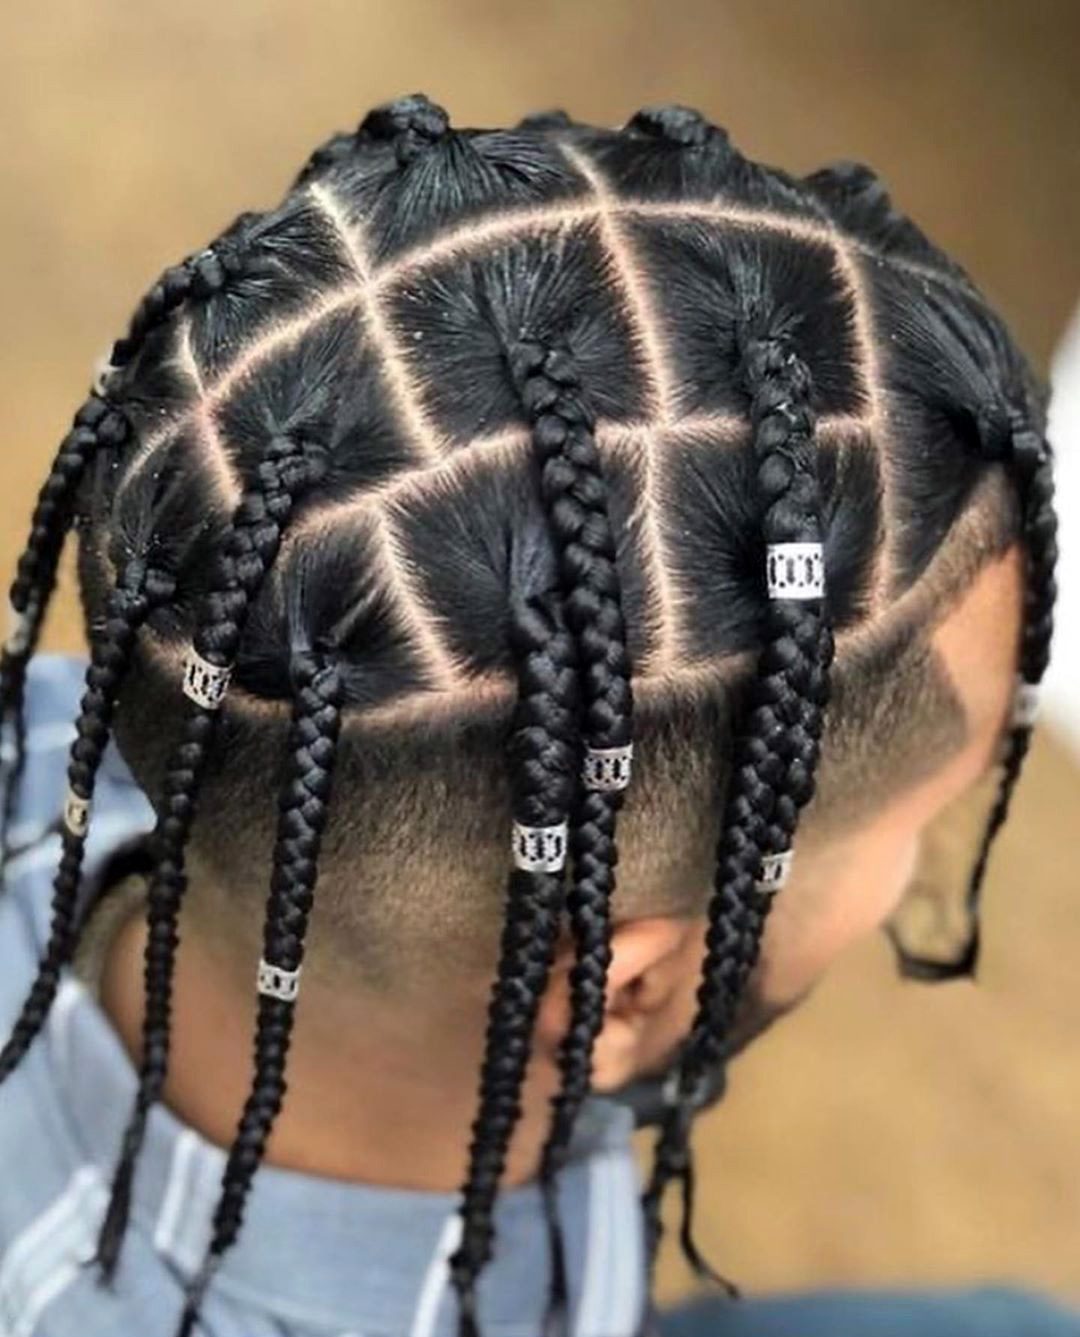 The Coolest Box Braid Hairstyles For Men From box braids to crochet braids, and dutch braids to marley twists, we've explained all the thought your braid options were limited to box braids and cornrows? the coolest box braid hairstyles for men